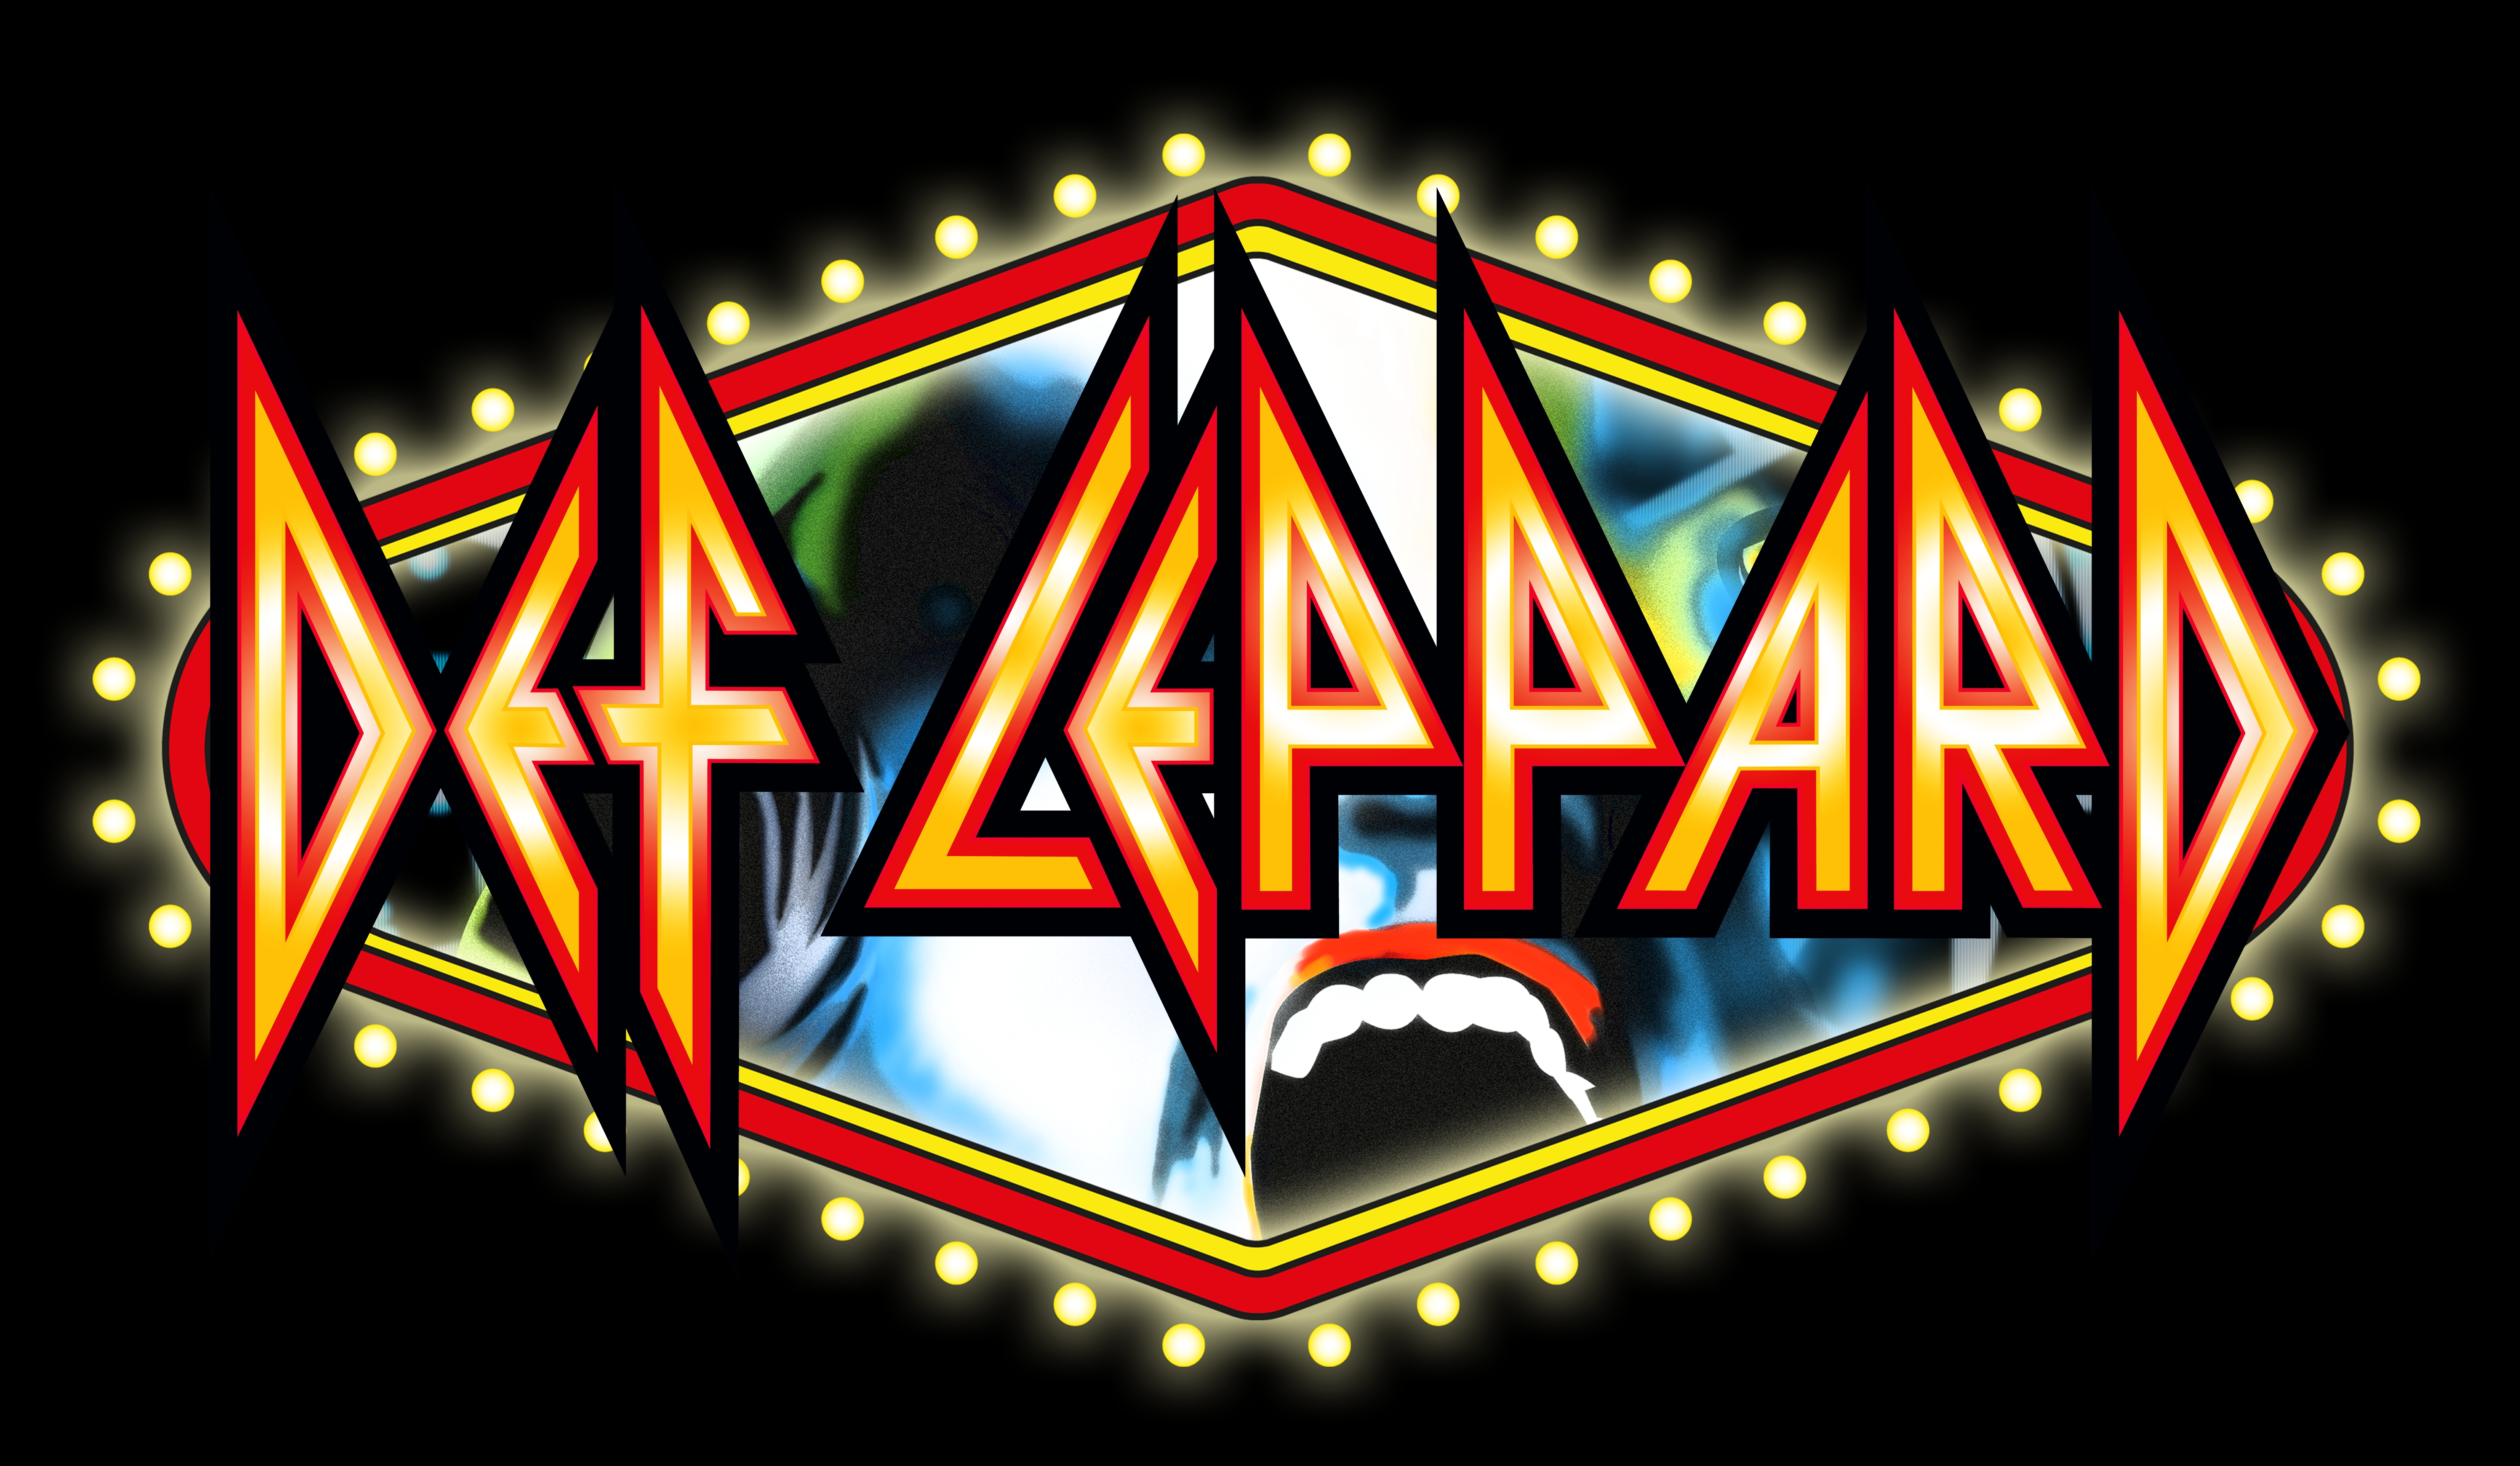 def leppard wallpaper by LynnetteS  Download on ZEDGE  b9ce